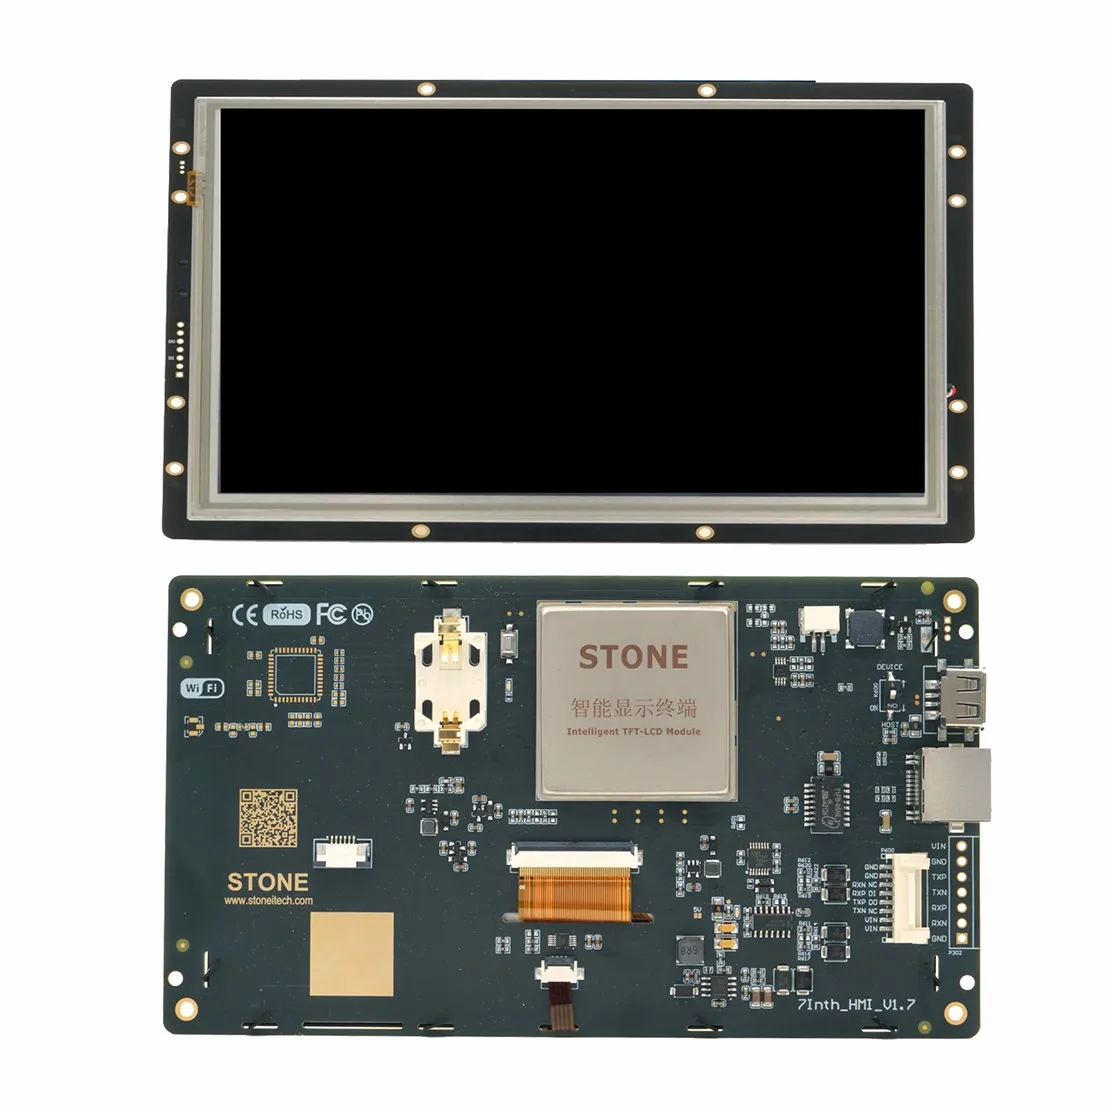 7.0 Industry Smart HMI TFT LCD module is a whole display system that comes with no-cost GUI design software(STONE Designer)